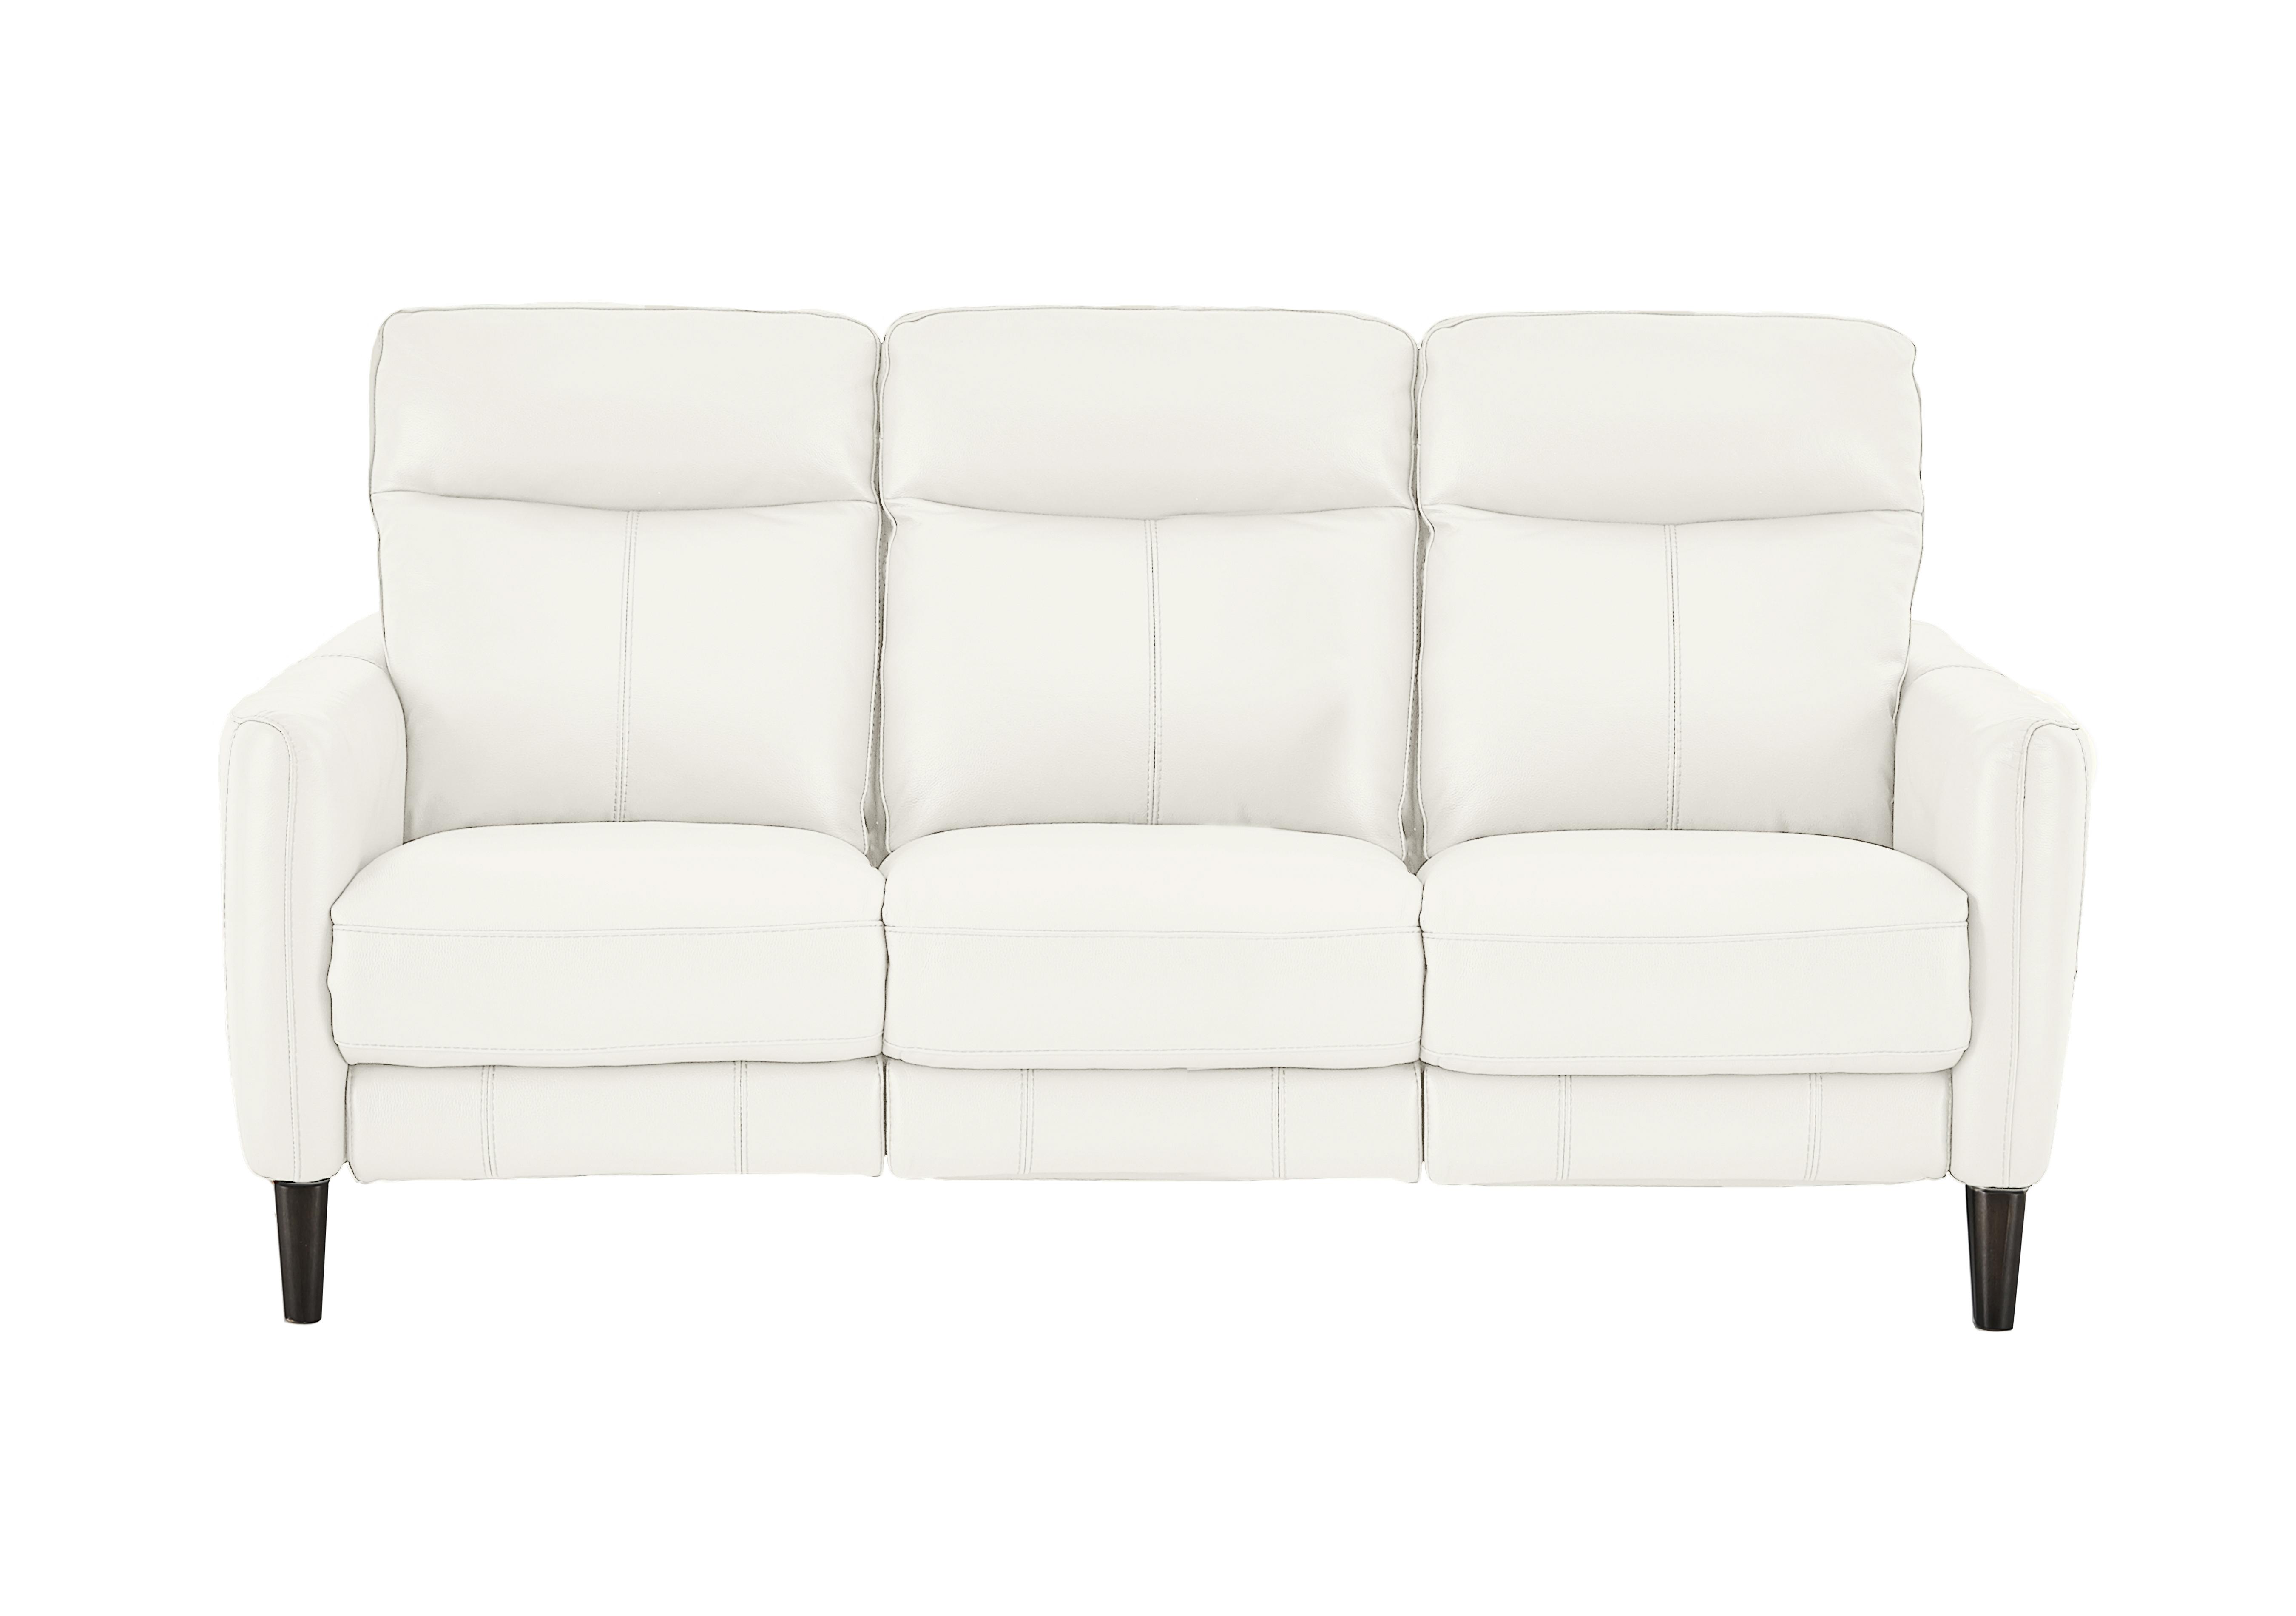 Compact Collection Petit 3 Seater Leather Sofa in Bv-744d Star White on Furniture Village